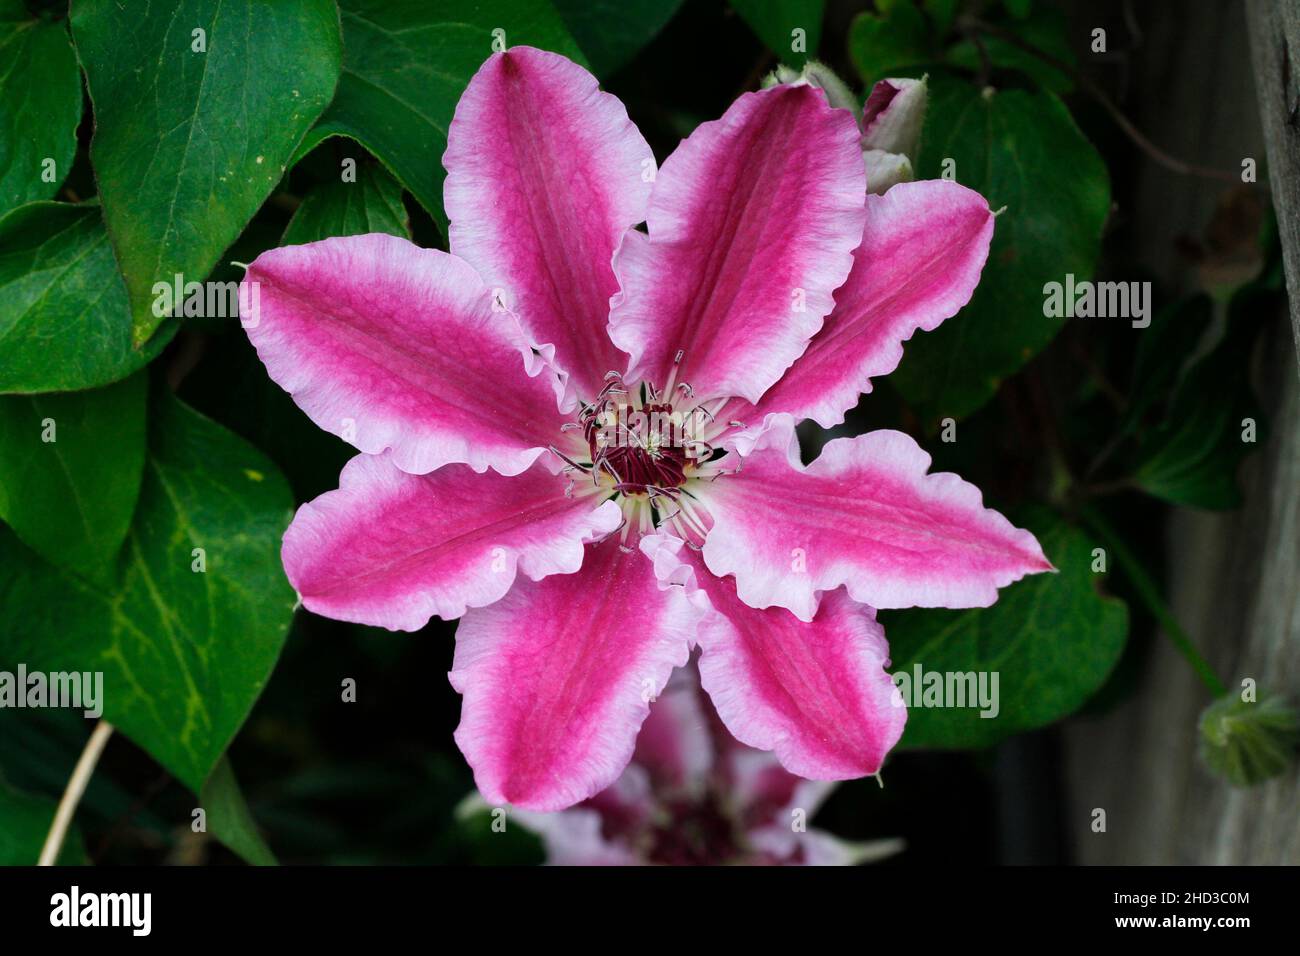 A close-up of a pink and white flower of a cultivated 'Nelly Moser' clematis plant/vine in a garden in Nanaimo, Vancouver Island, BC, Canada in May Stock Photo